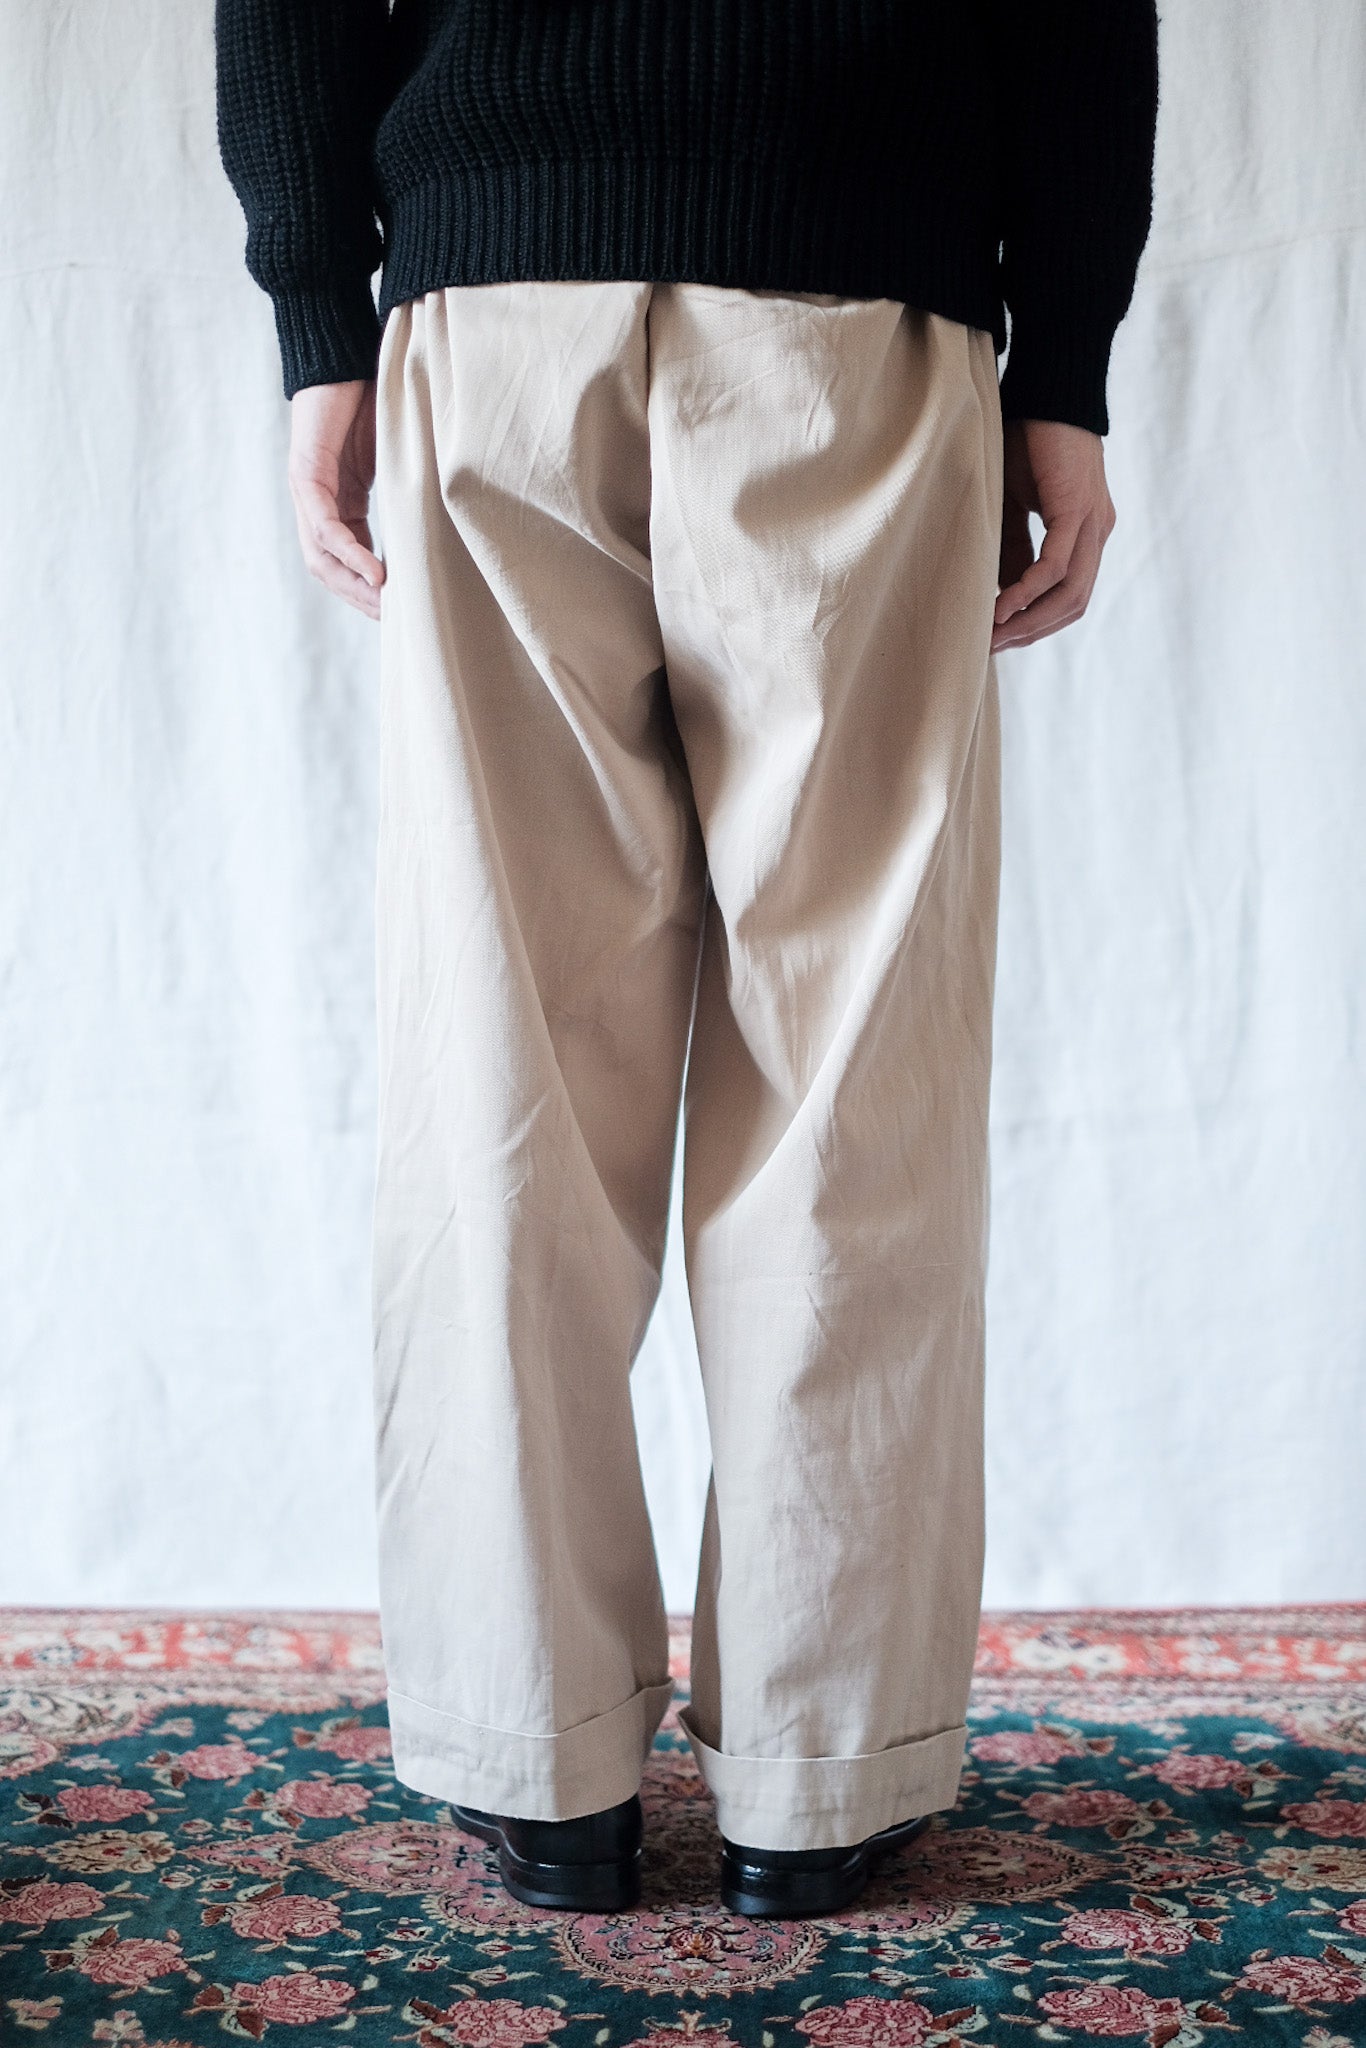 [~ 50's] French Vintage Chino Work Pants "Adolphe Lafont"